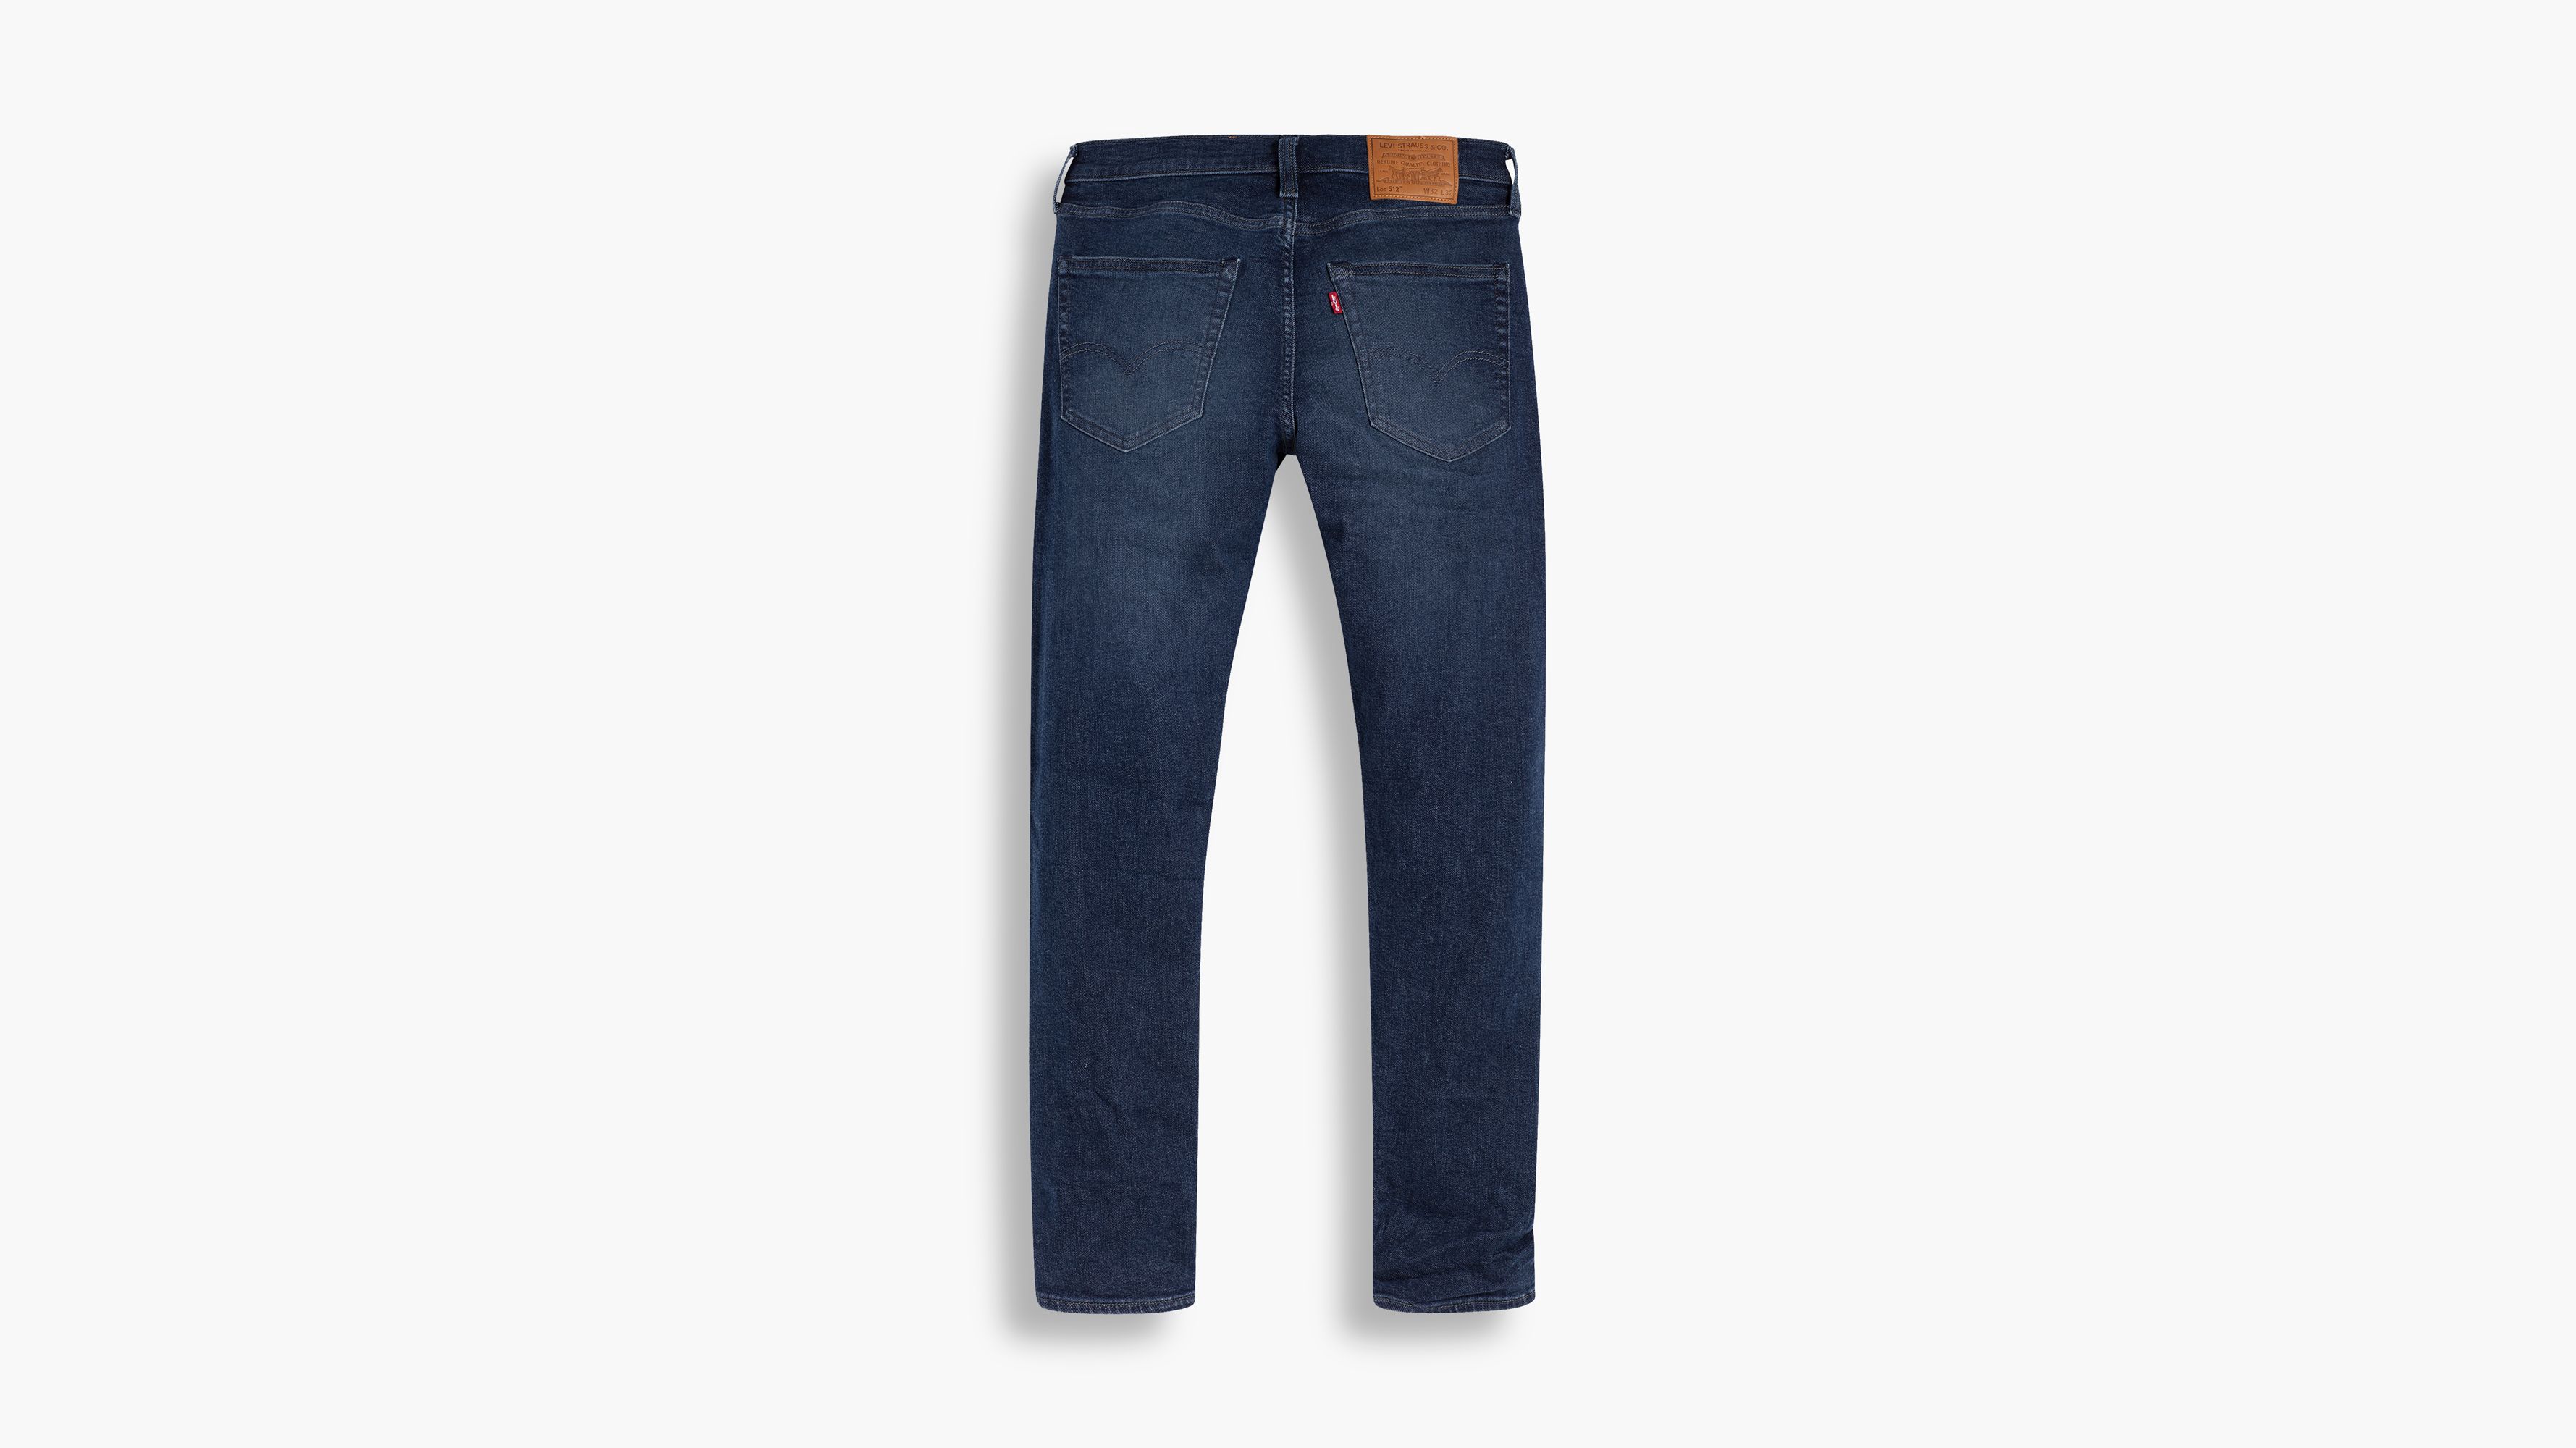 levis 501 tapered hombre